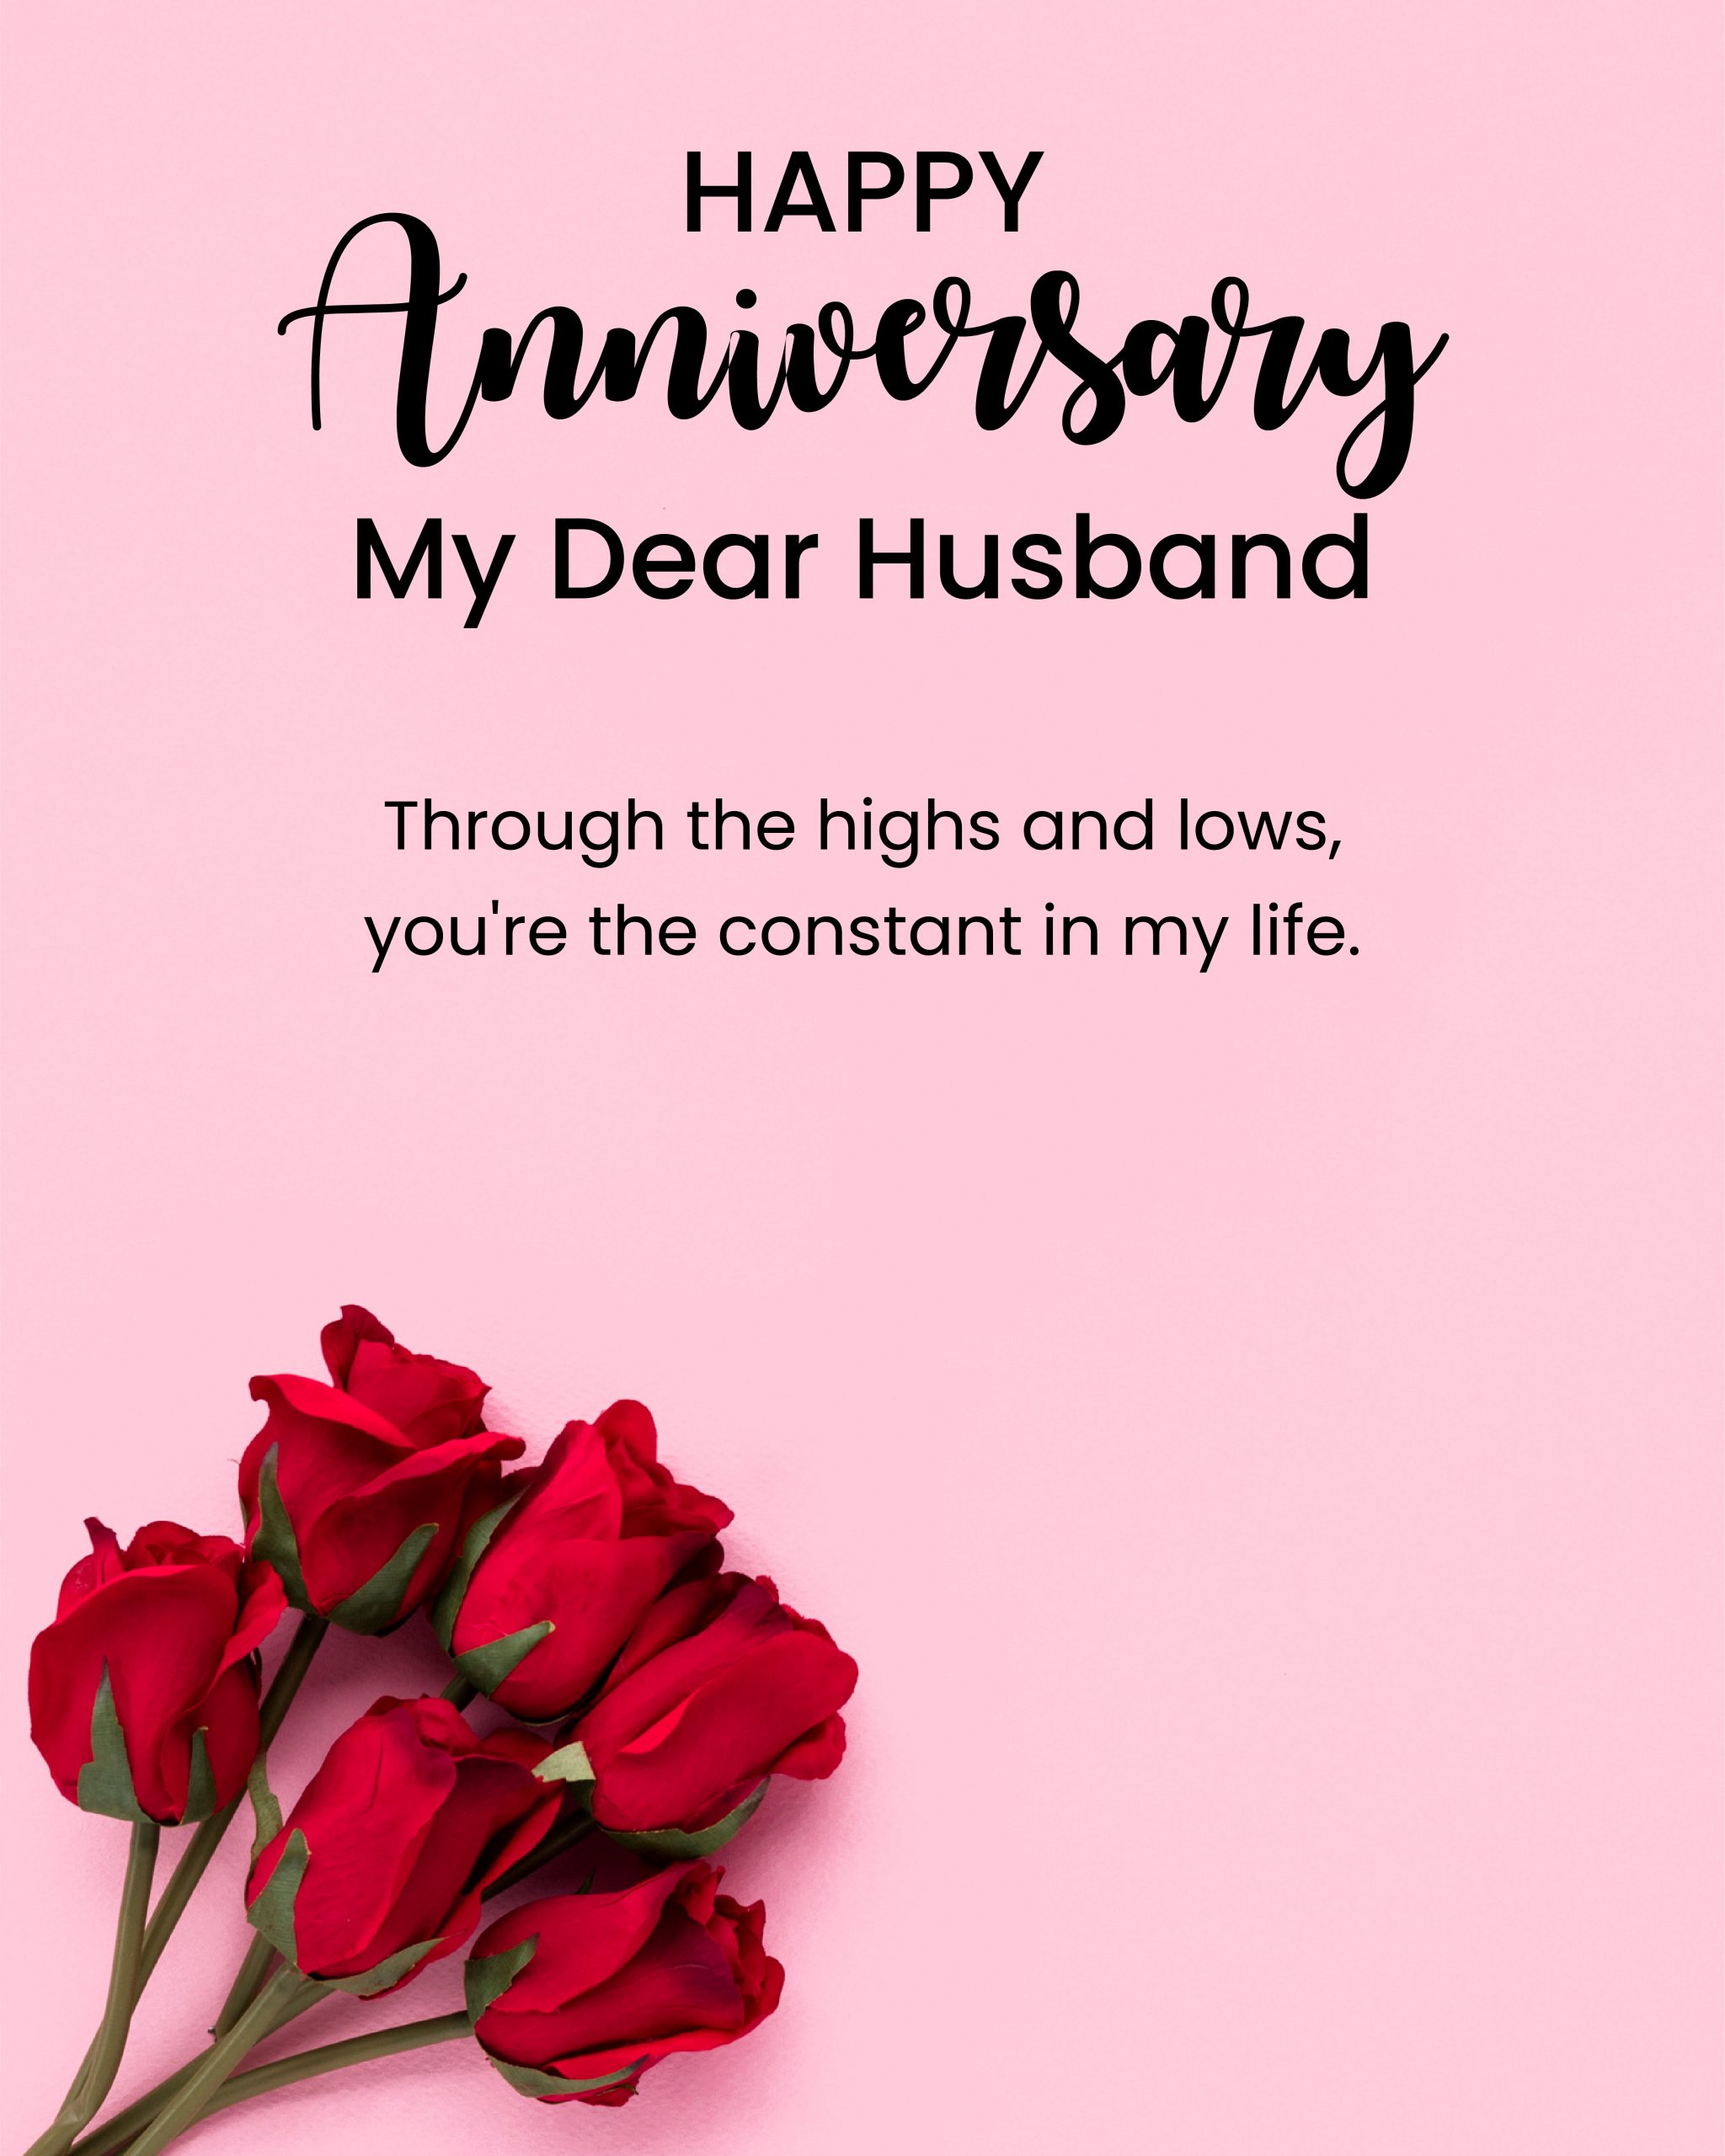 140 Sweet Wishes for Happy Anniversary Hubby - husband - 1001 Contoh